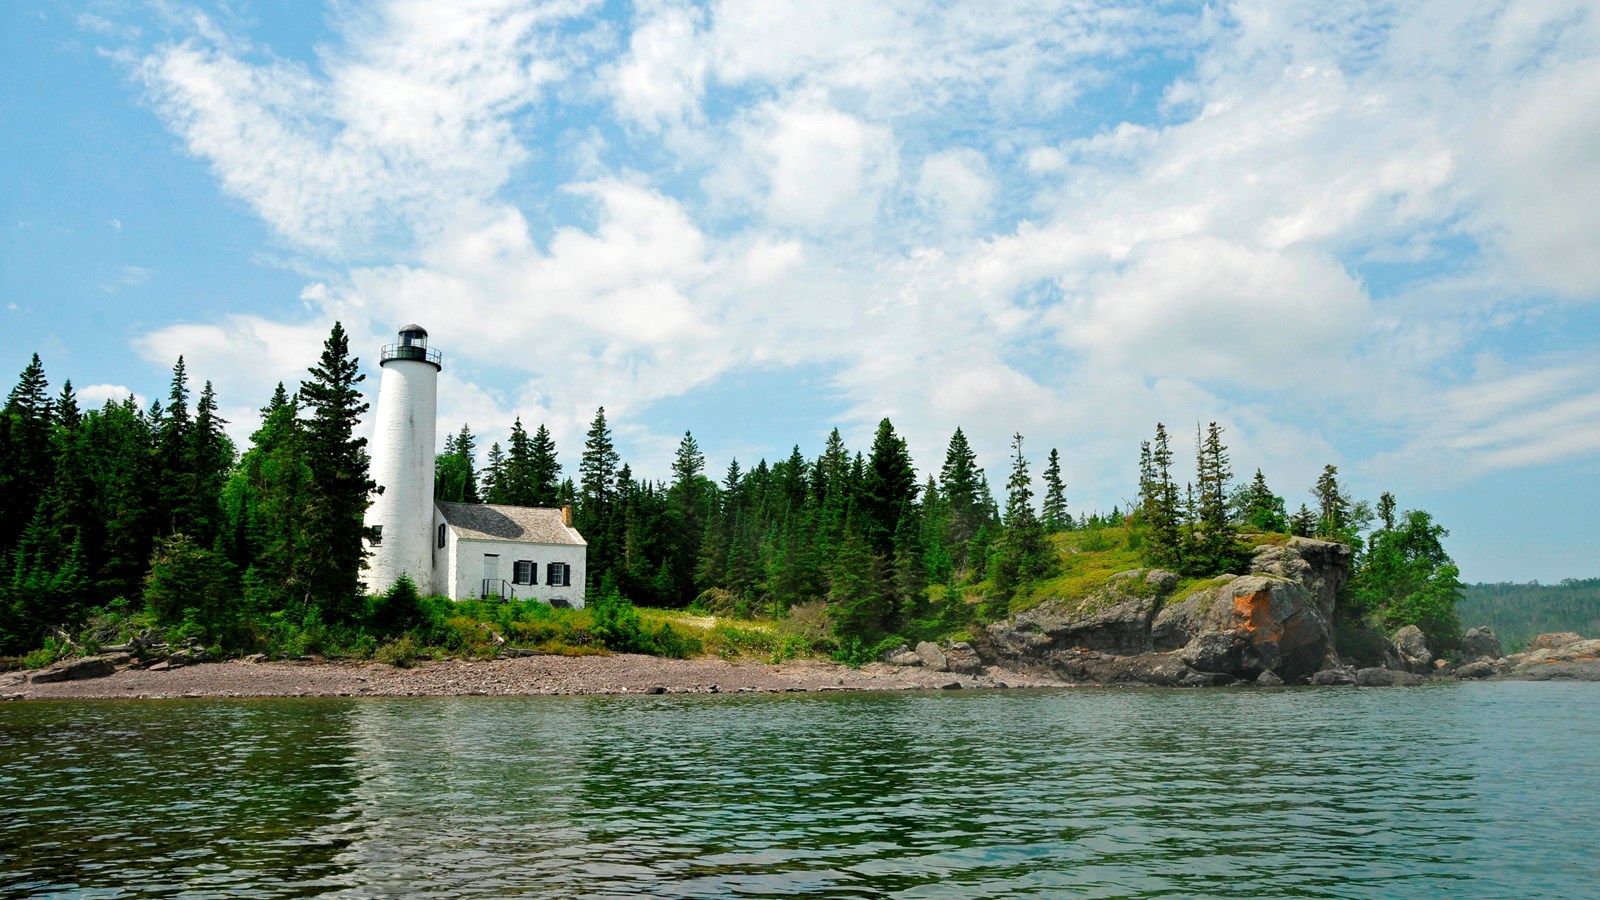 a view of the Rock Harbor Lighthouse from the waters of Middle Islands Passage on a bright blue day